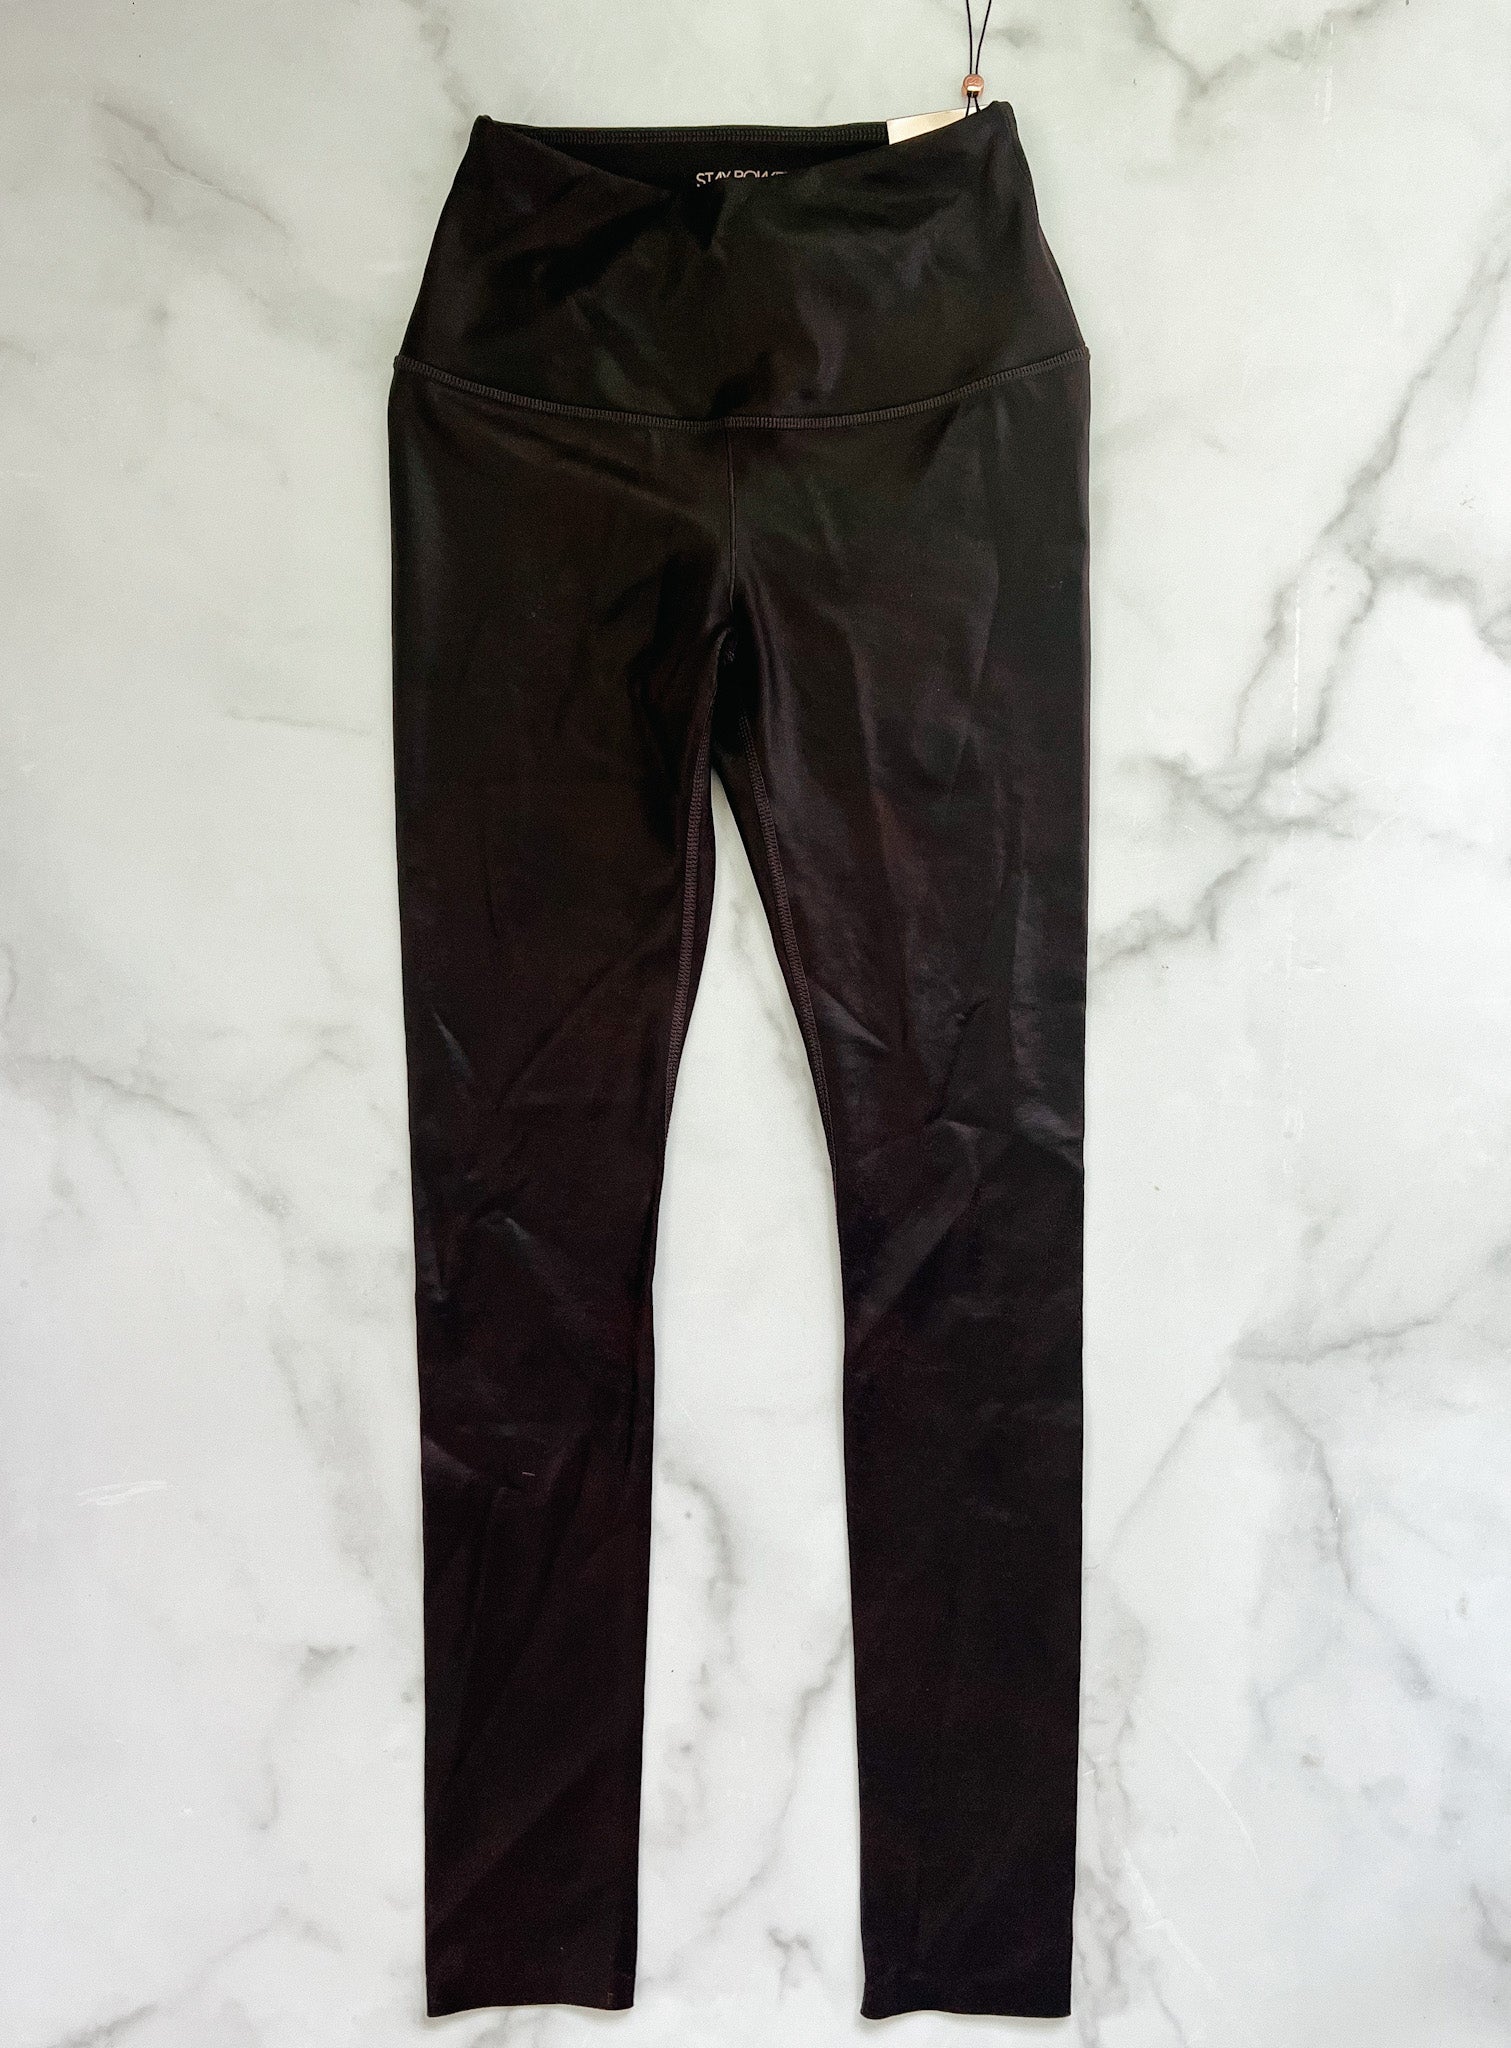 Recycled Faux Leather Hybrid Legging